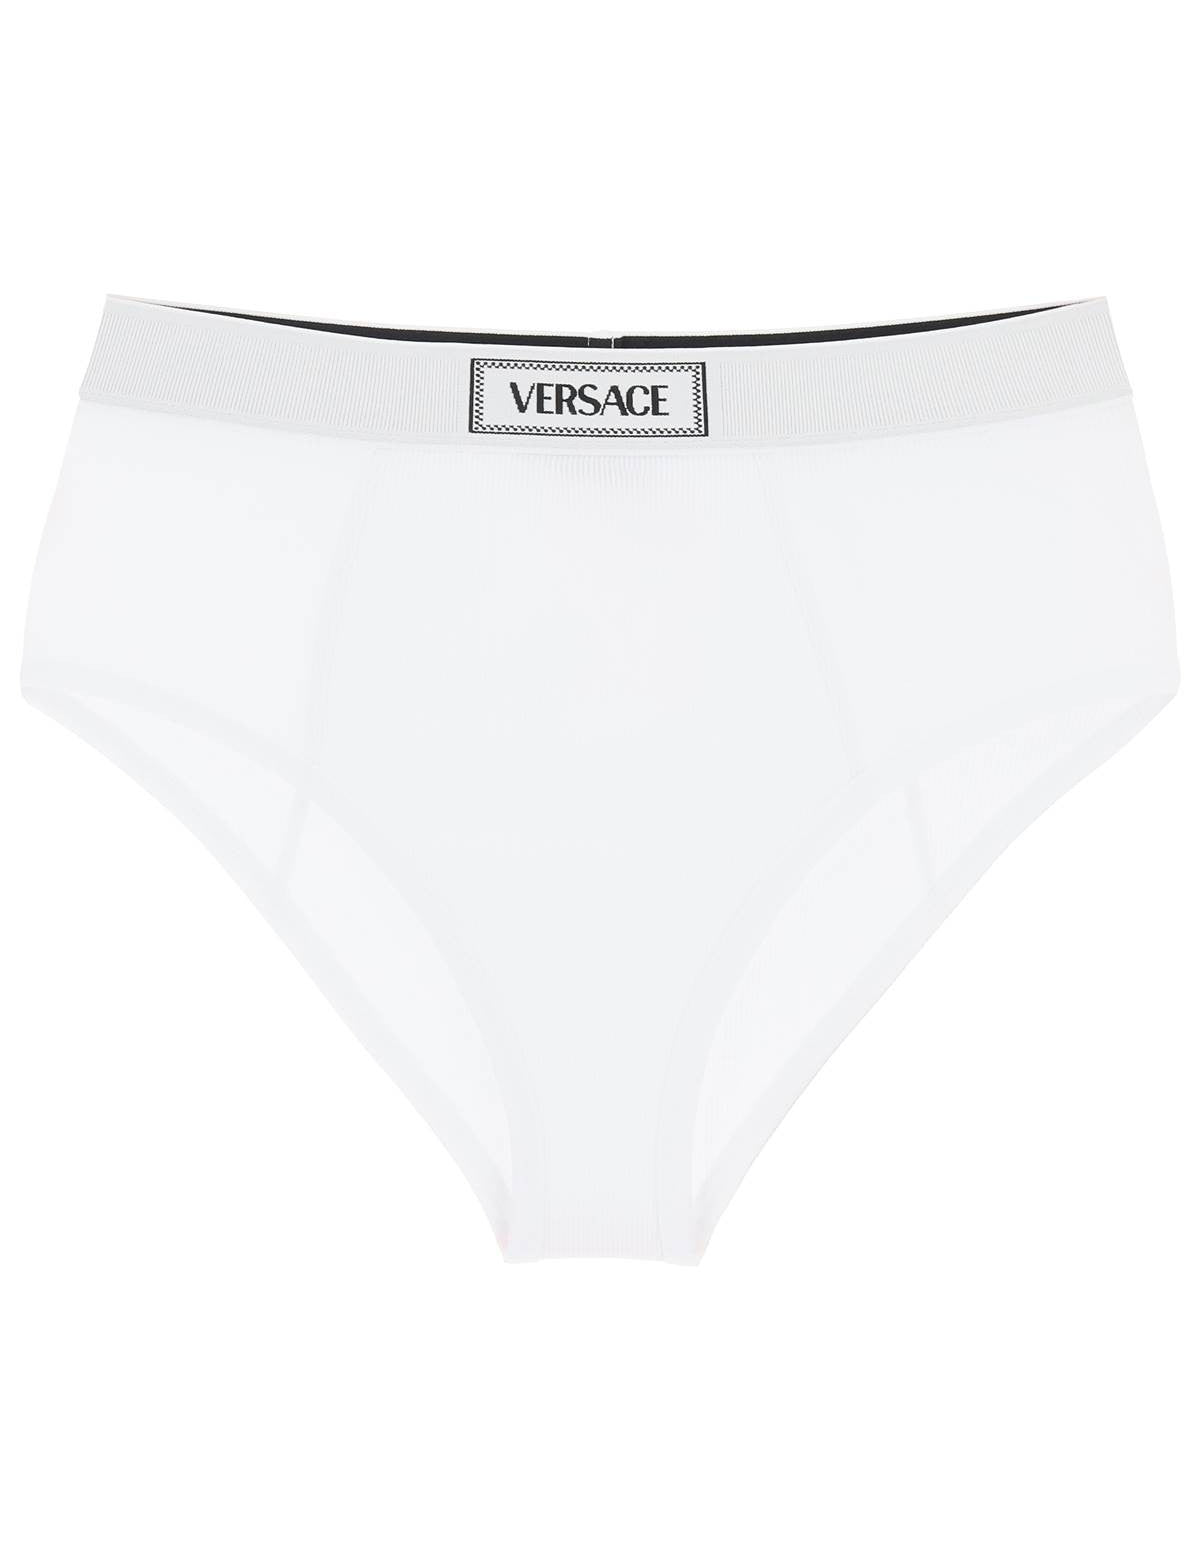 ribbed-briefs-with-90s-logo.jpg